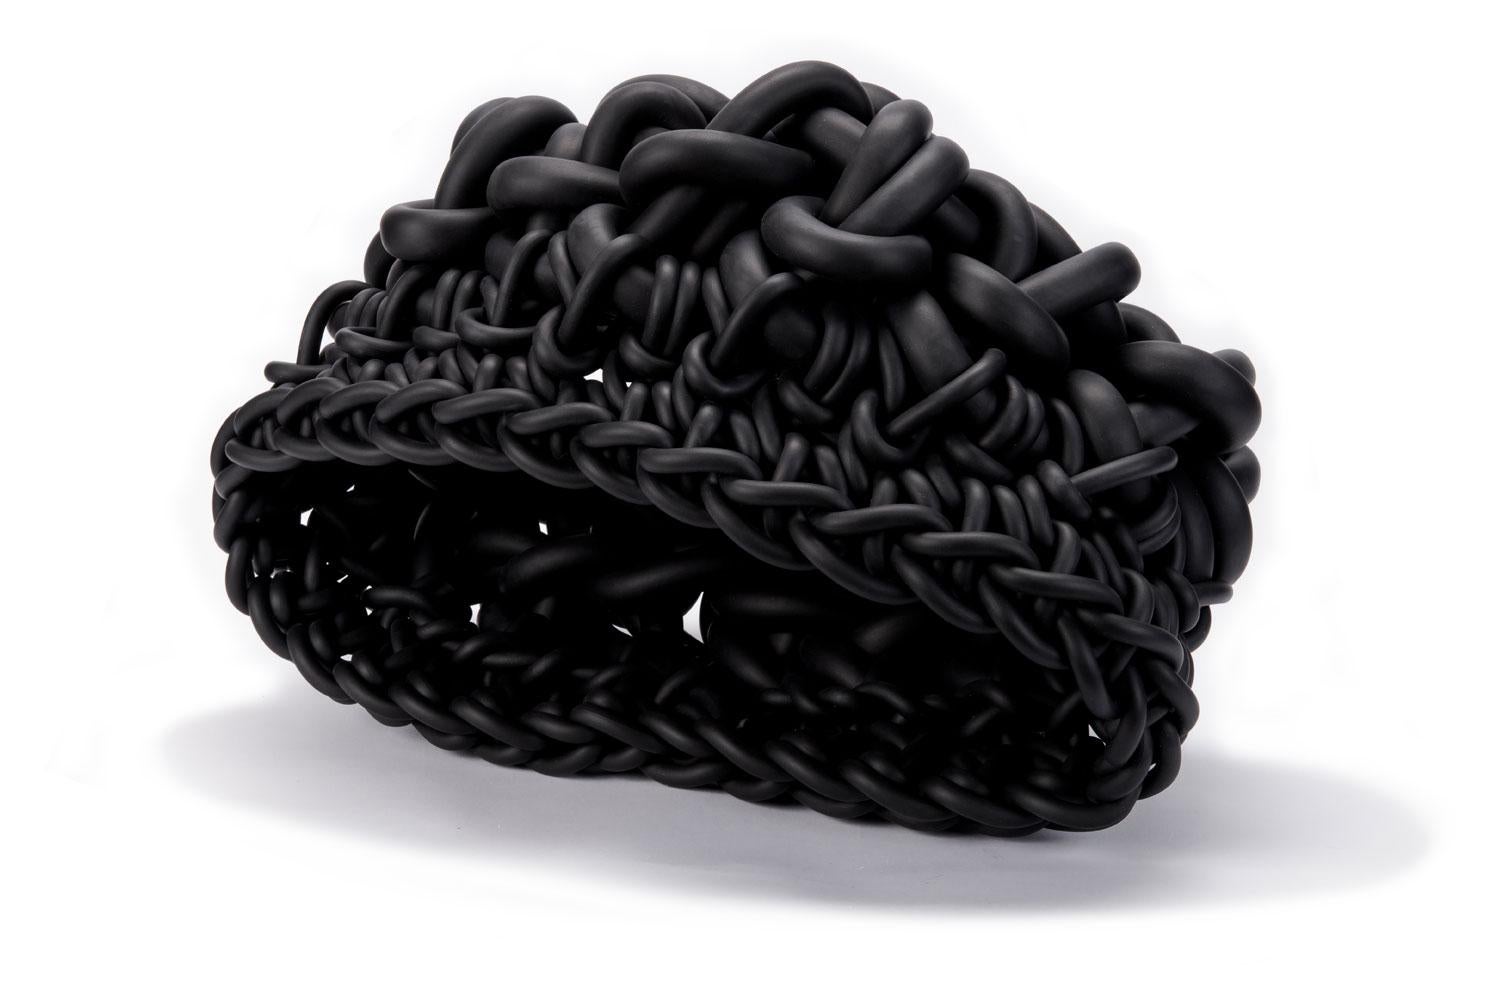 Hand-knitted in Italy, this black colored neoprene basket is designed by Rosanna Contadini. Neoprene is strong and resistant and has great elasticity. Each basket is unique in shape, color, size and weaves and works well in a variety of interiors.